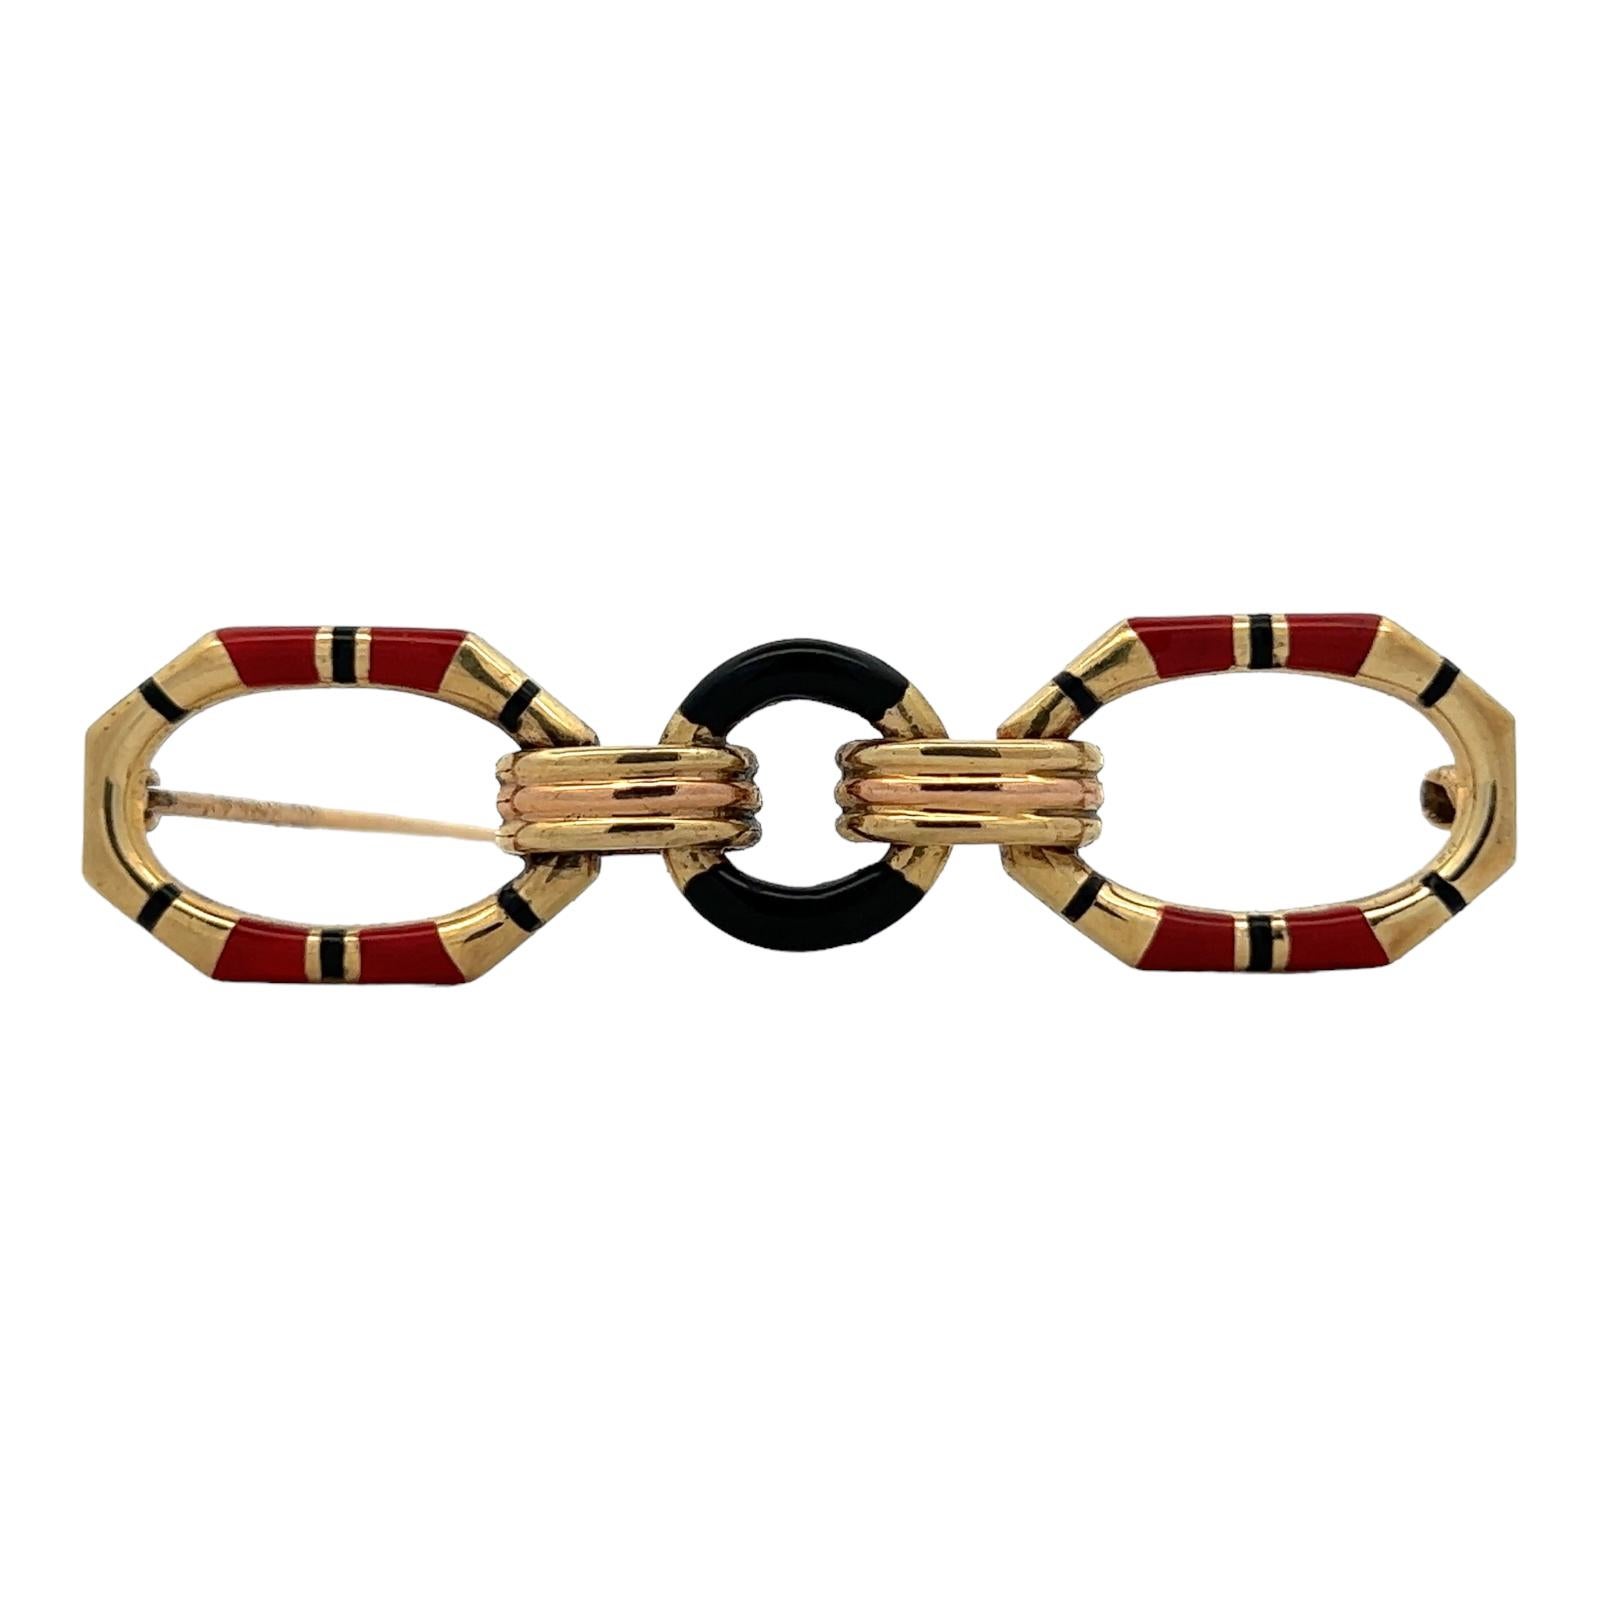 Geometric enamel brooch handcrafted in 14 karat yellow gold. The chic mid-20th century brooch is sophisticated and features black and orange enamel contrasting with bright yellow gold . The pin measures 2.25 inches in length and .60 inches in width.